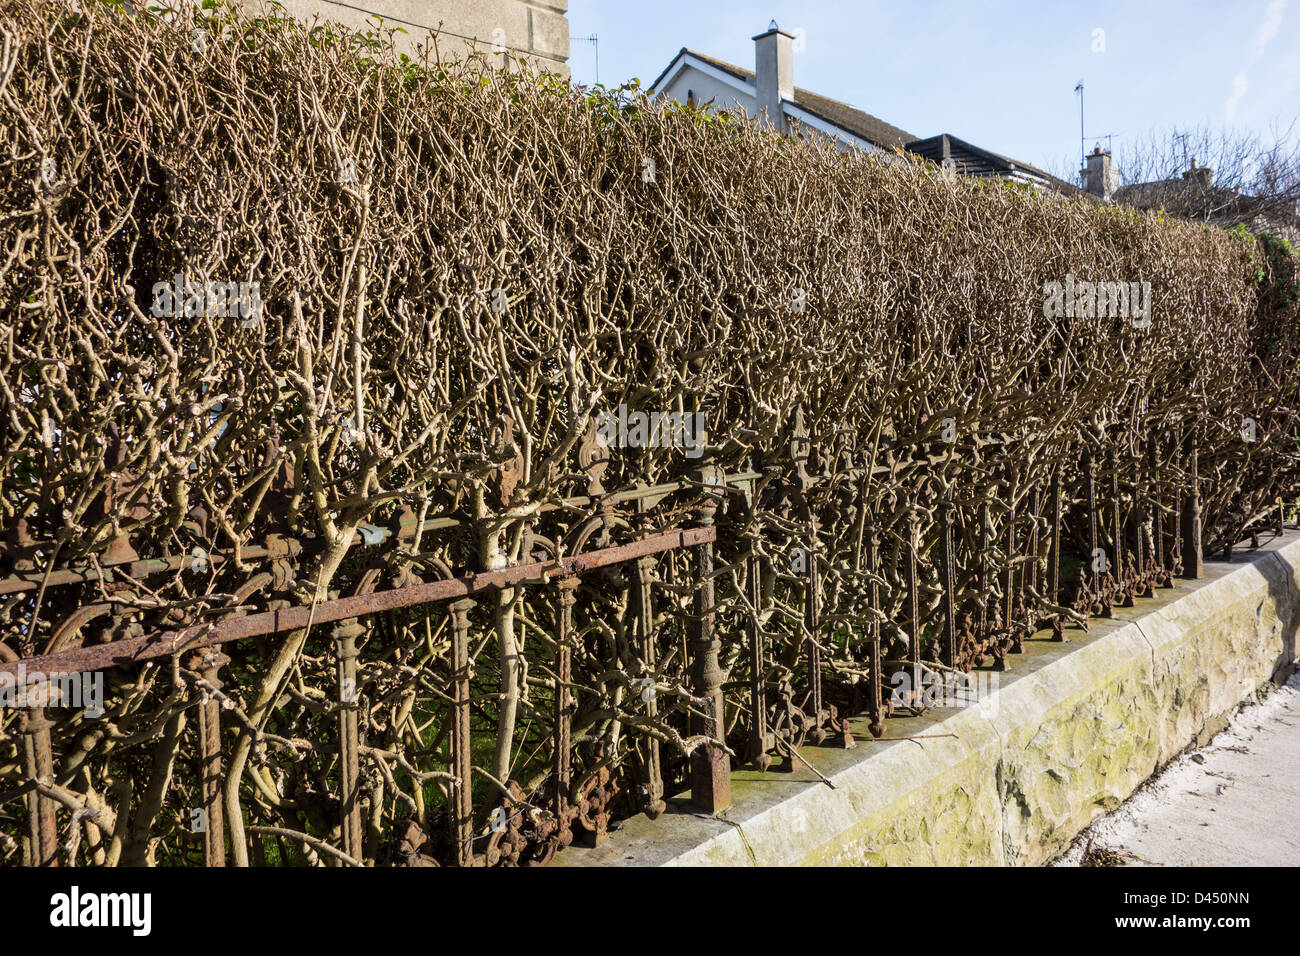 A severely cut back pruned hedge around a private house garden - Holmpatrick, Skerries, Co.Dublin, Ireland Stock Photo